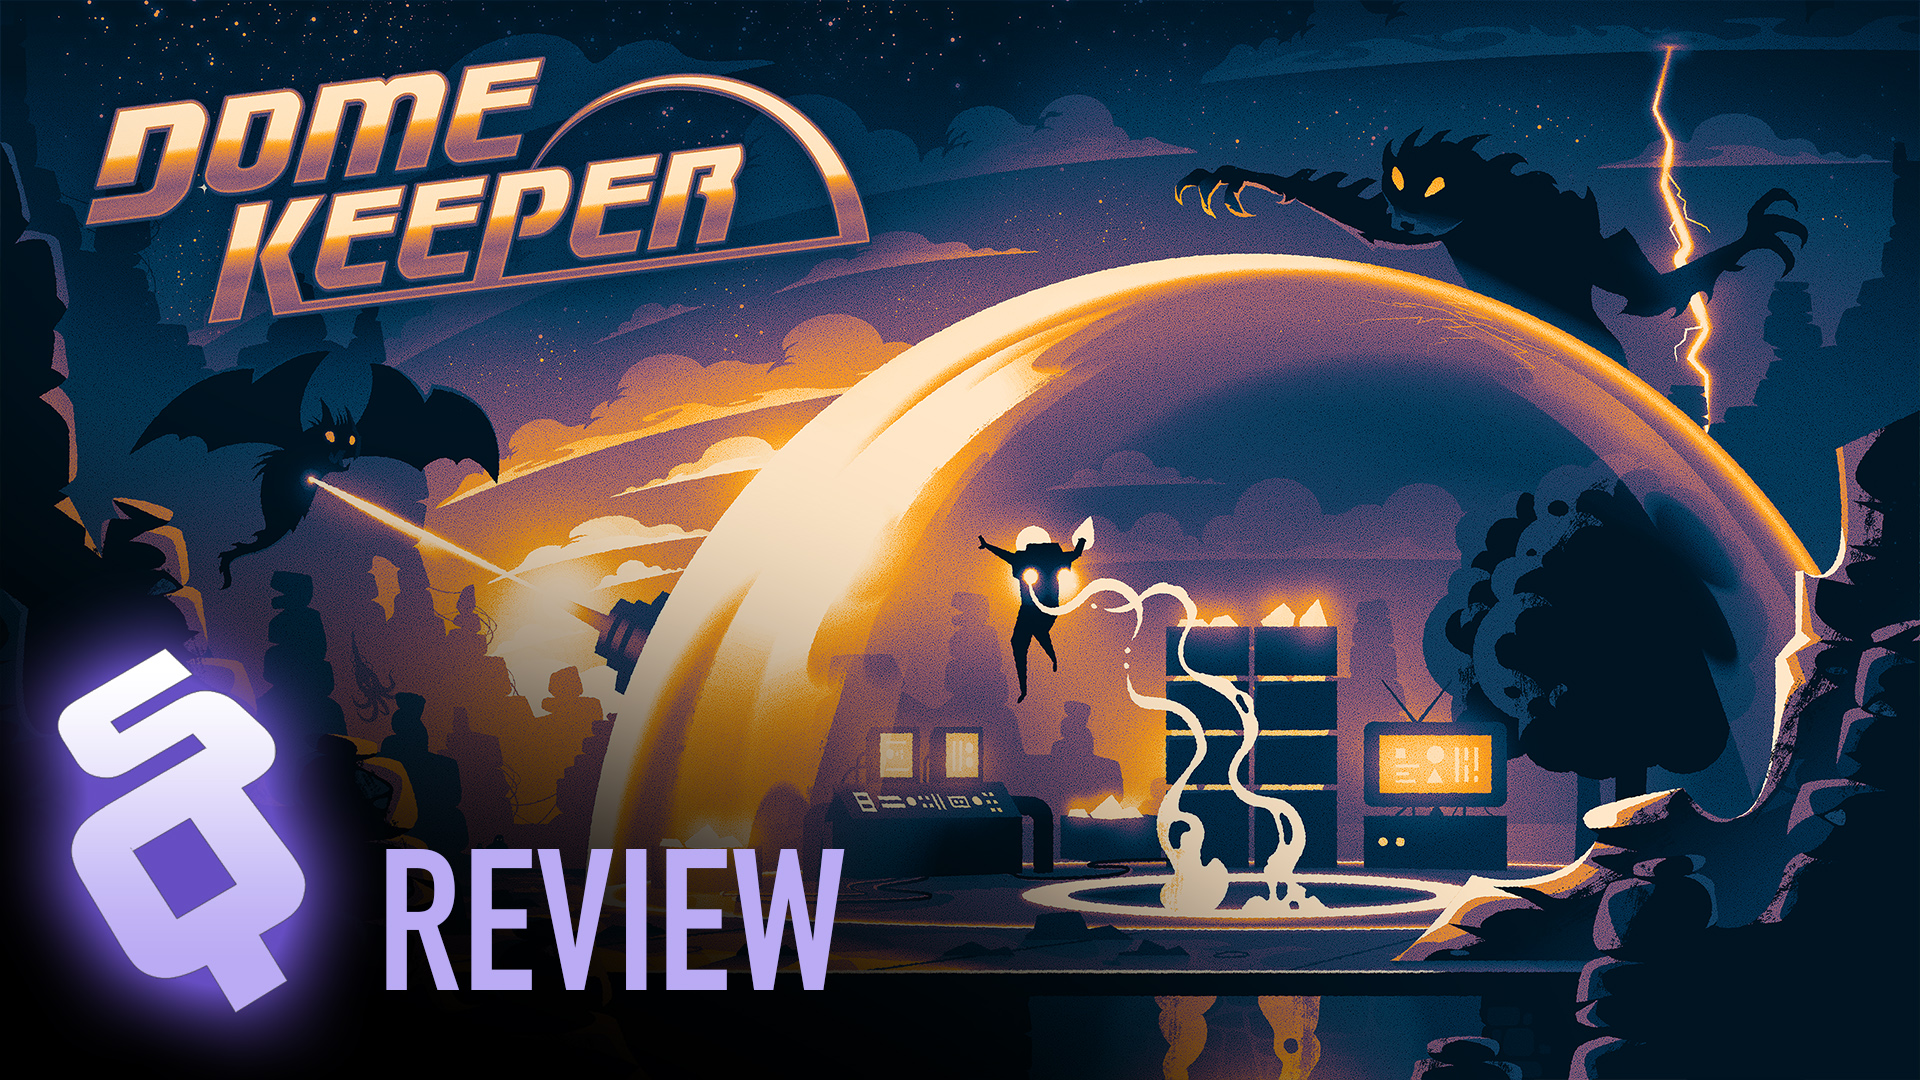 Dome Keeper review